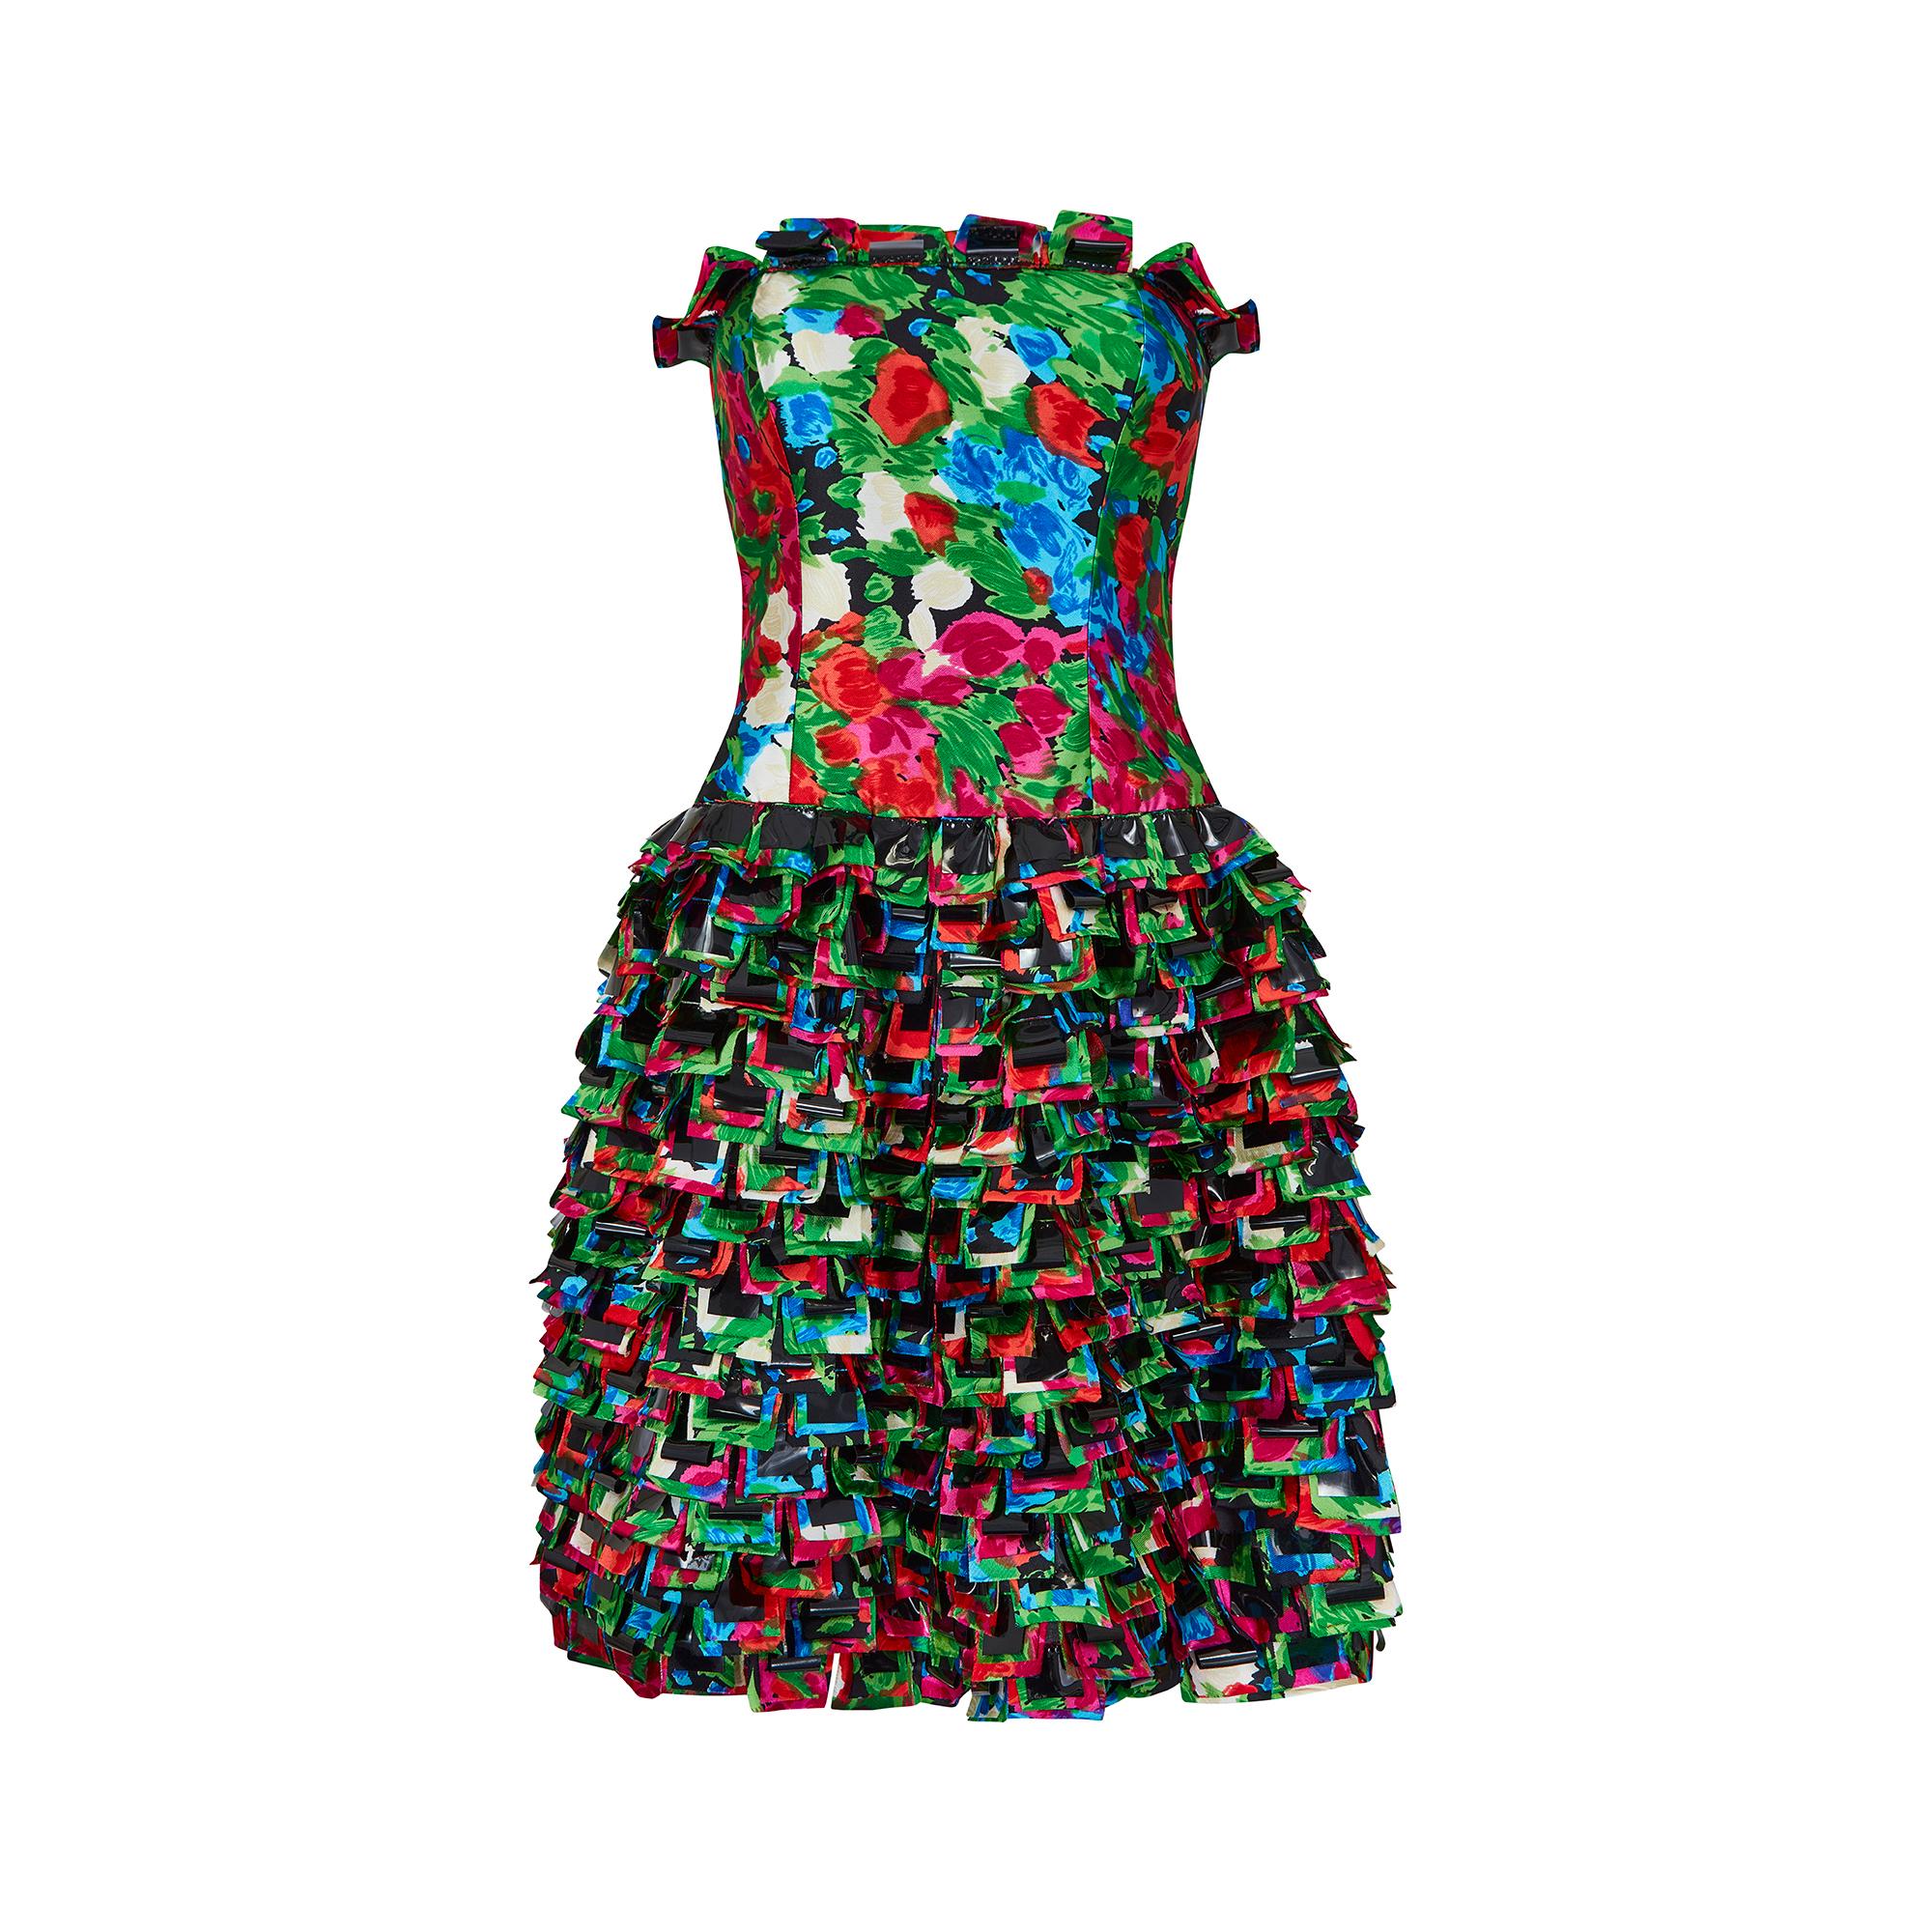 This playful, runway documented dress is by Oscar de la Renta, from the Pre Fall 2008 collection. The dress is constructed with a brightly printed silk, featuring red, pink, green, blue and white flowers in a striking, almost abstract design. The